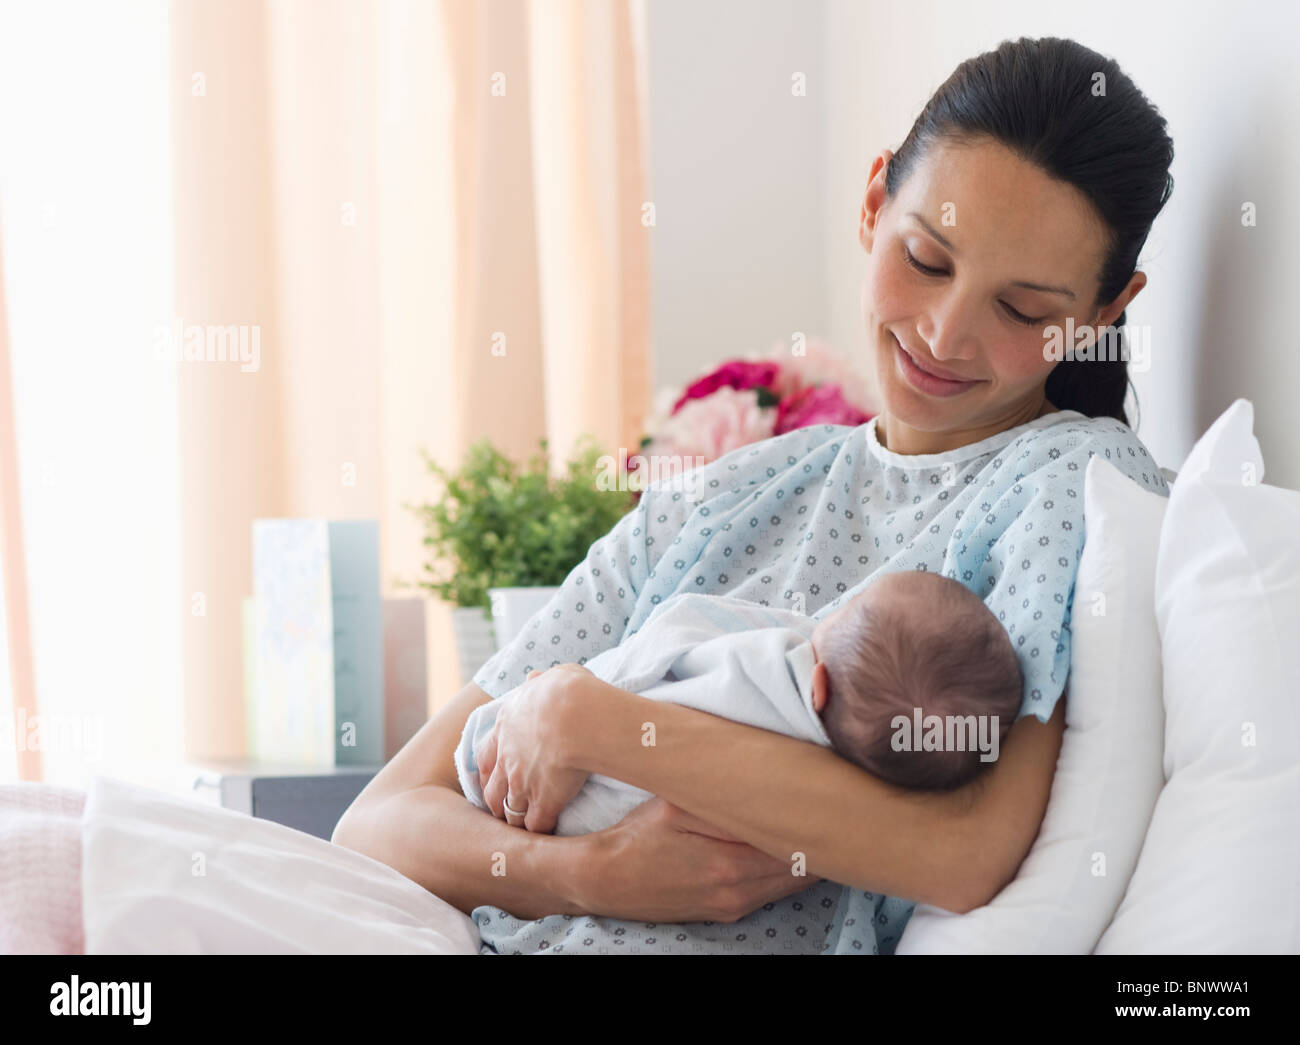 Mother holding newborn baby in hospital bed Banque D'Images